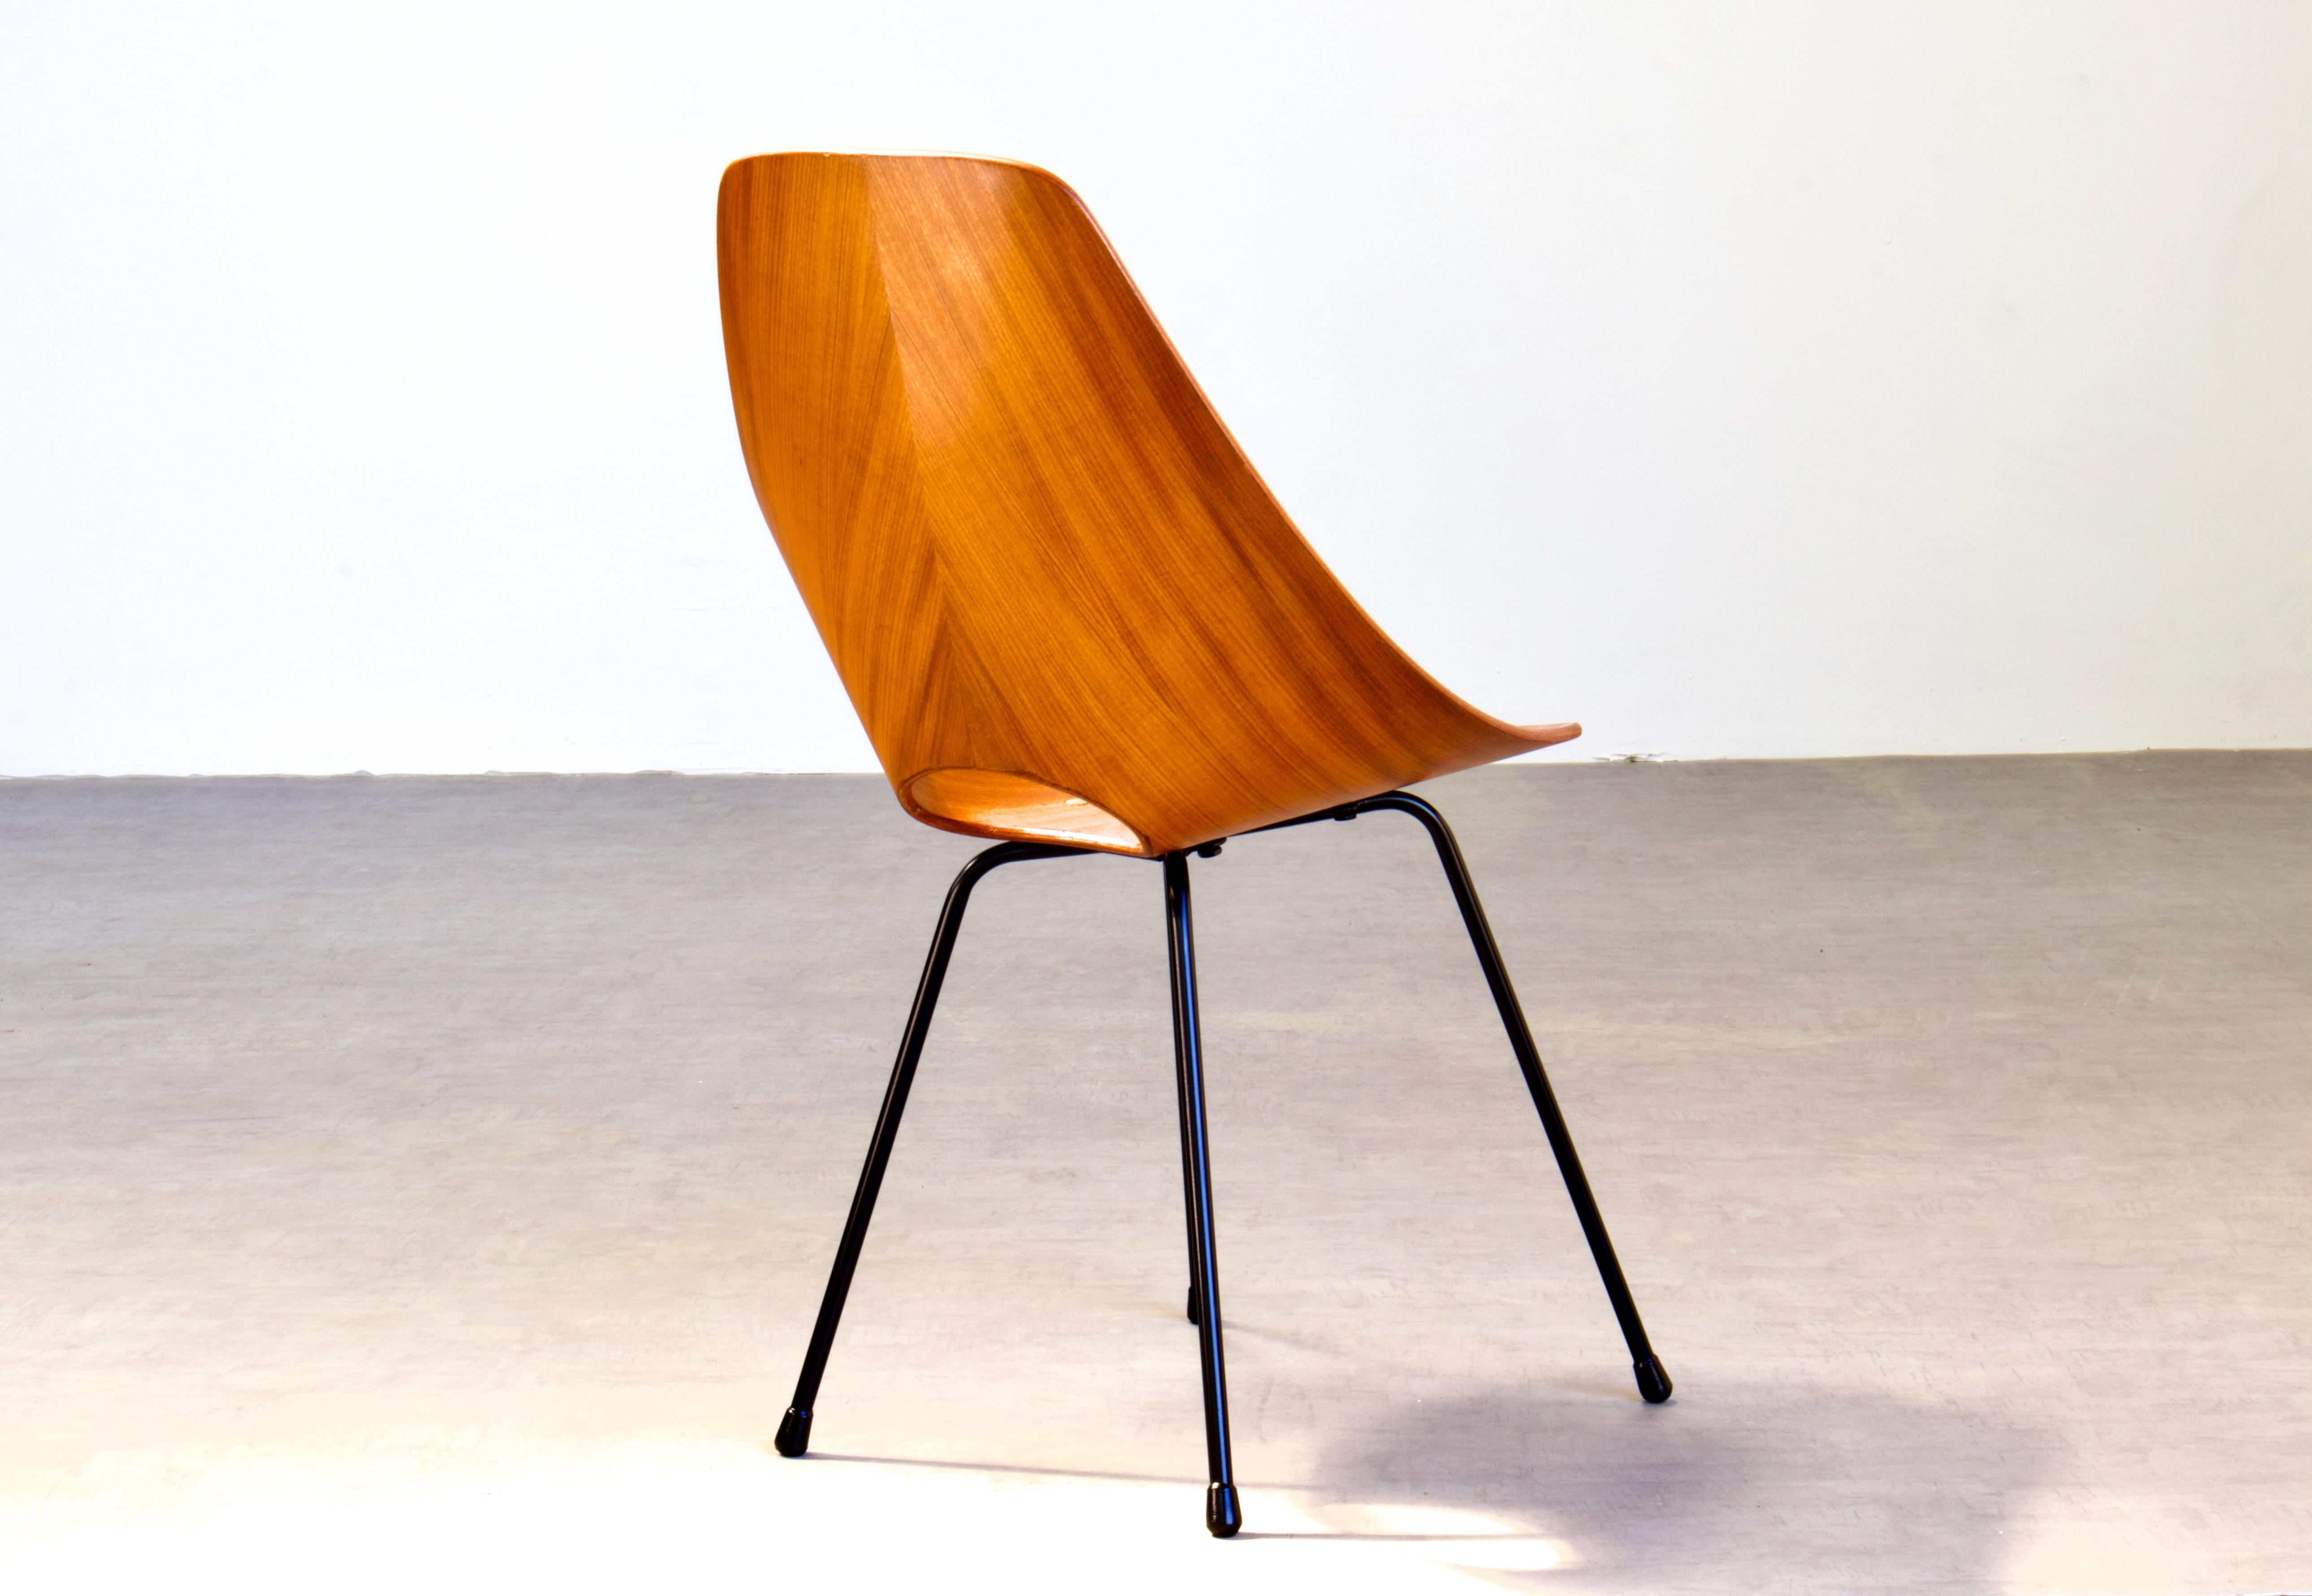 Mid-20th Century Fully Restored Medea Side Chair in Medium Exotic Hardwood, Nobili, 1955 Italy For Sale